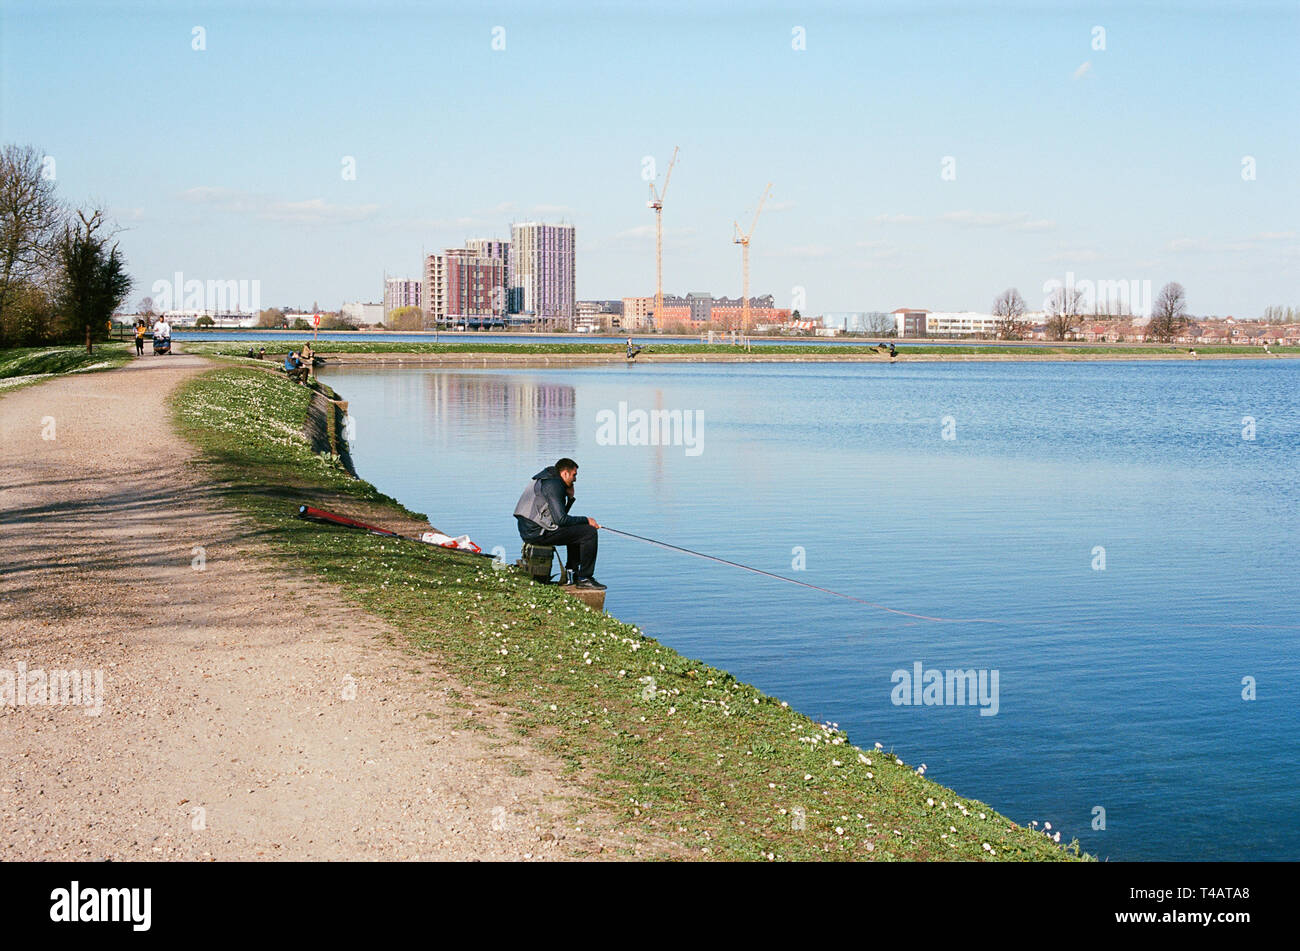 Anglers on the banks of Walthamstow Reservoirs on Walthamstow Wetlands, North East London UK Stock Photo